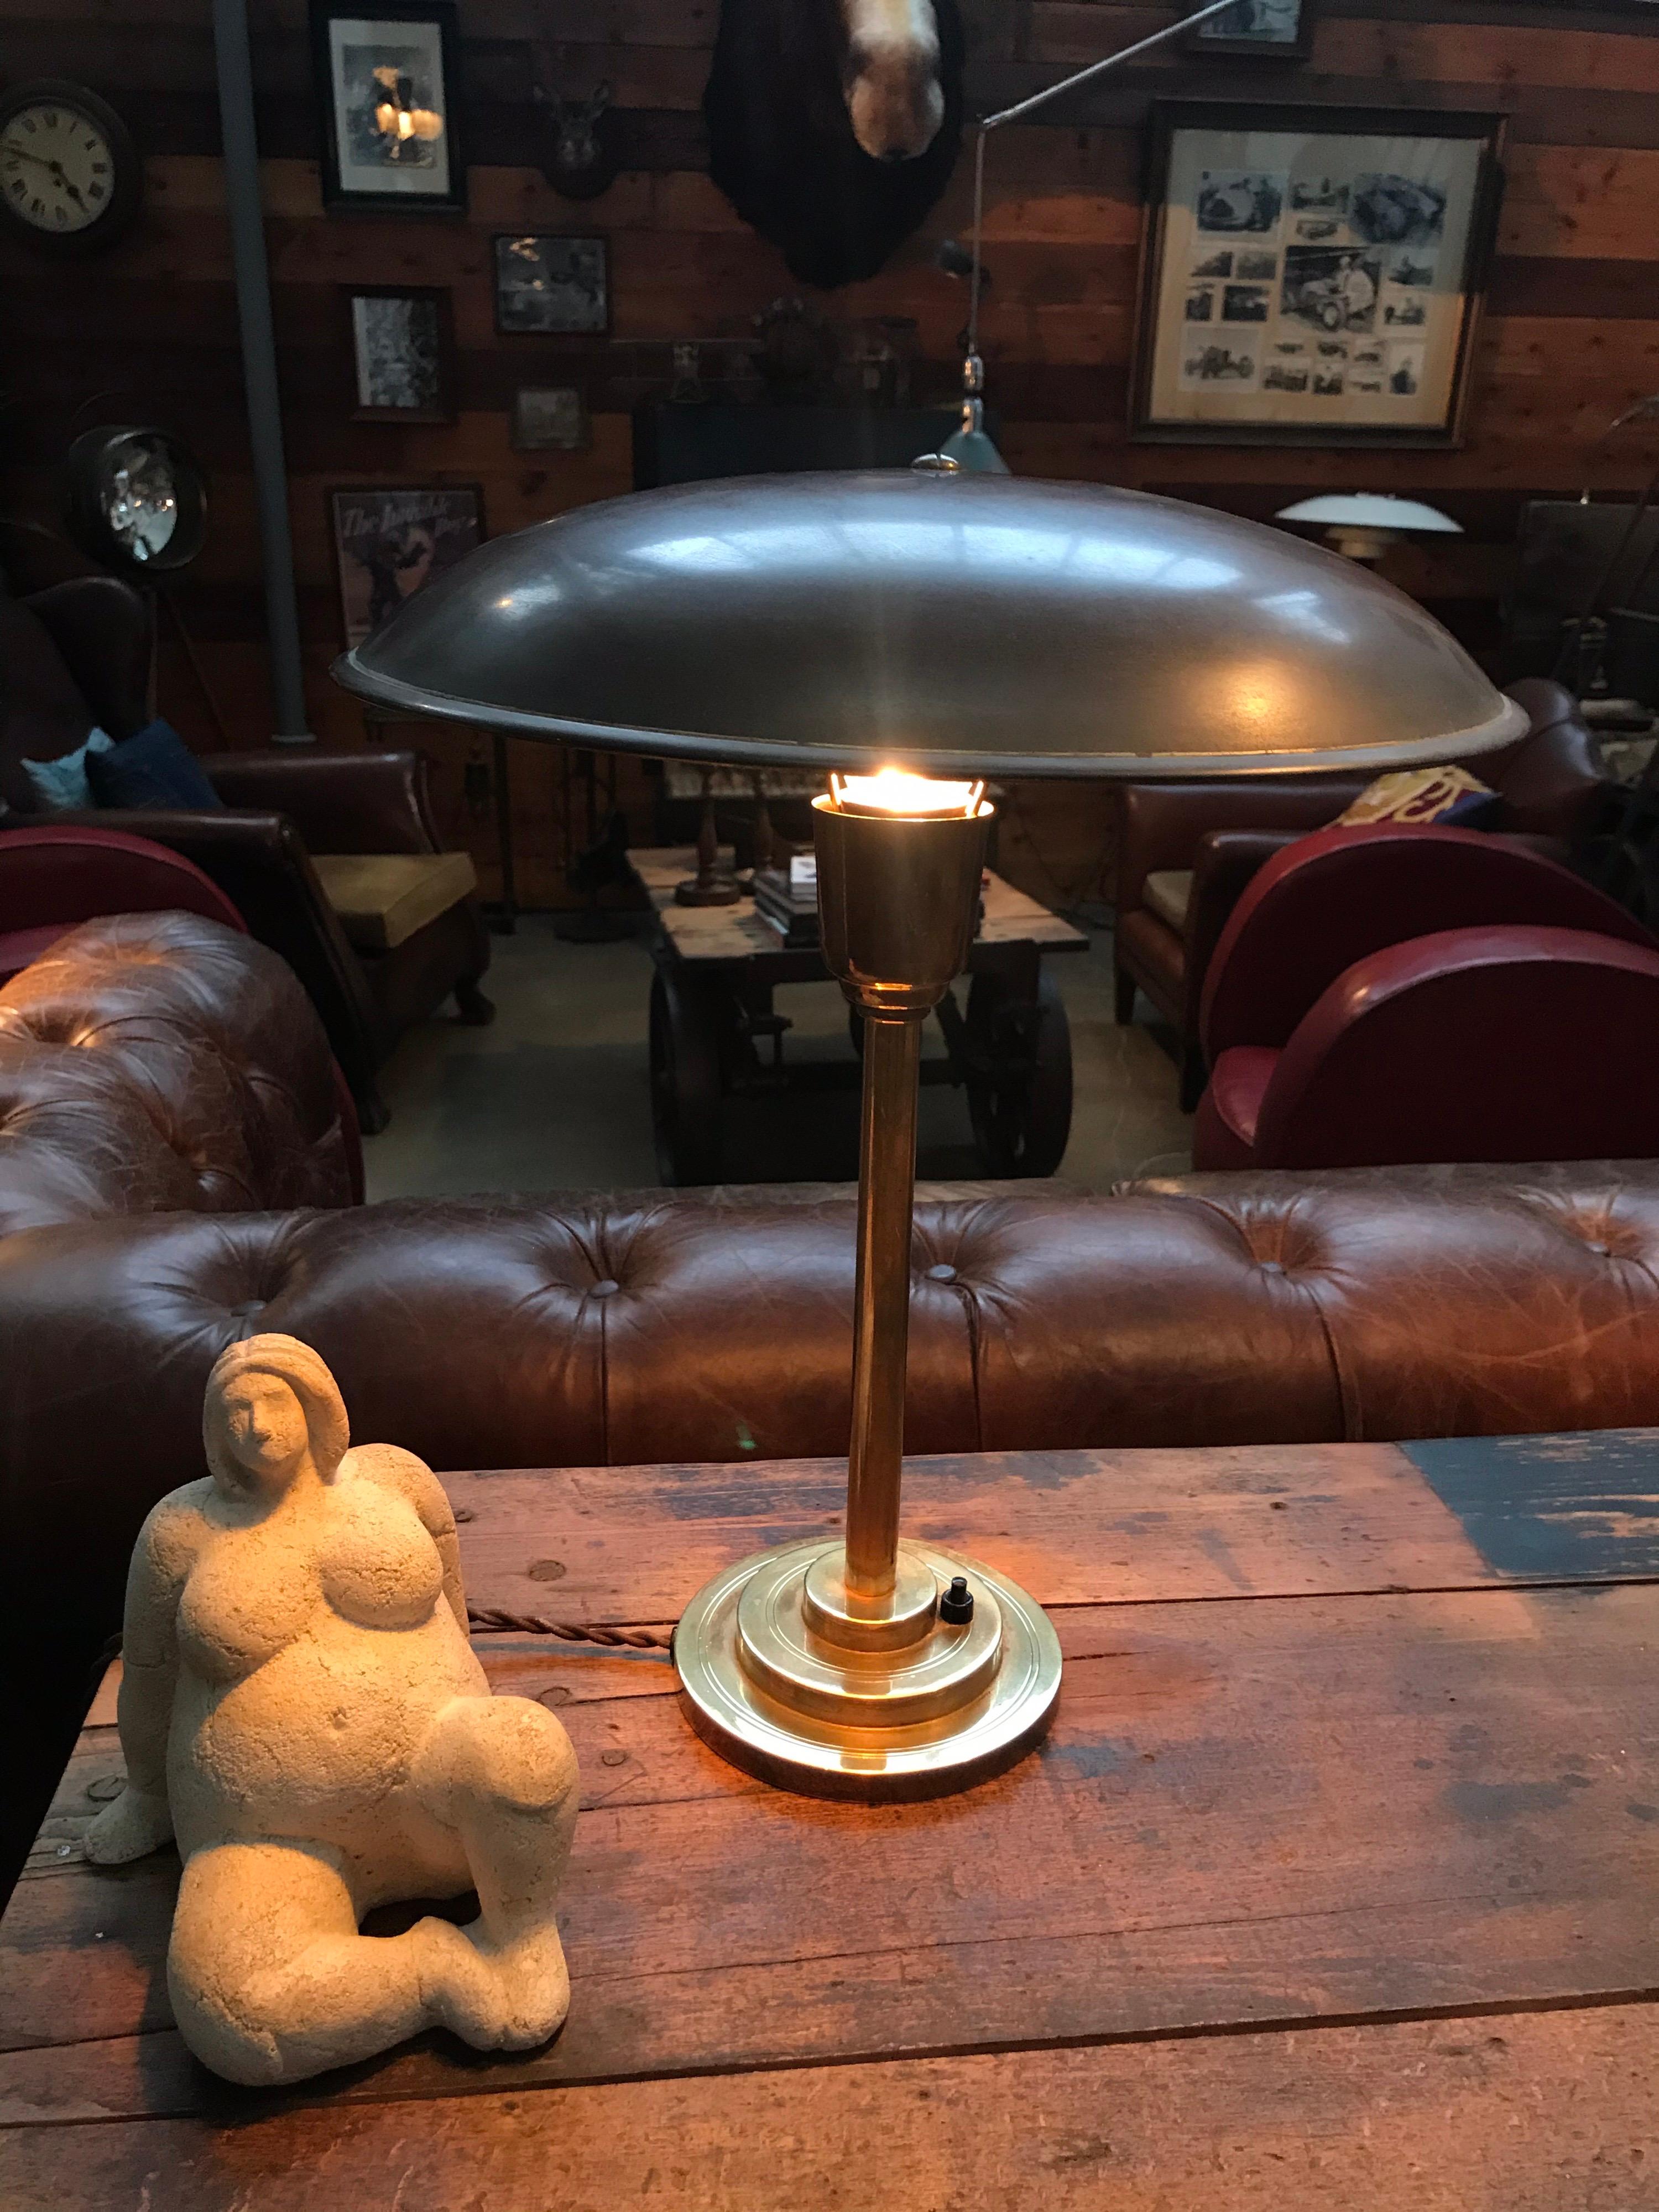 A very attractive Art Deco table lamp in copper and brass. 
A very stylish Art Deco design and with a hint of modernism. 
Brass 3 step base and with a spun copper shade. 
A Bakelite bulb holder.
All with a lovely patina and wear to the surfaces.